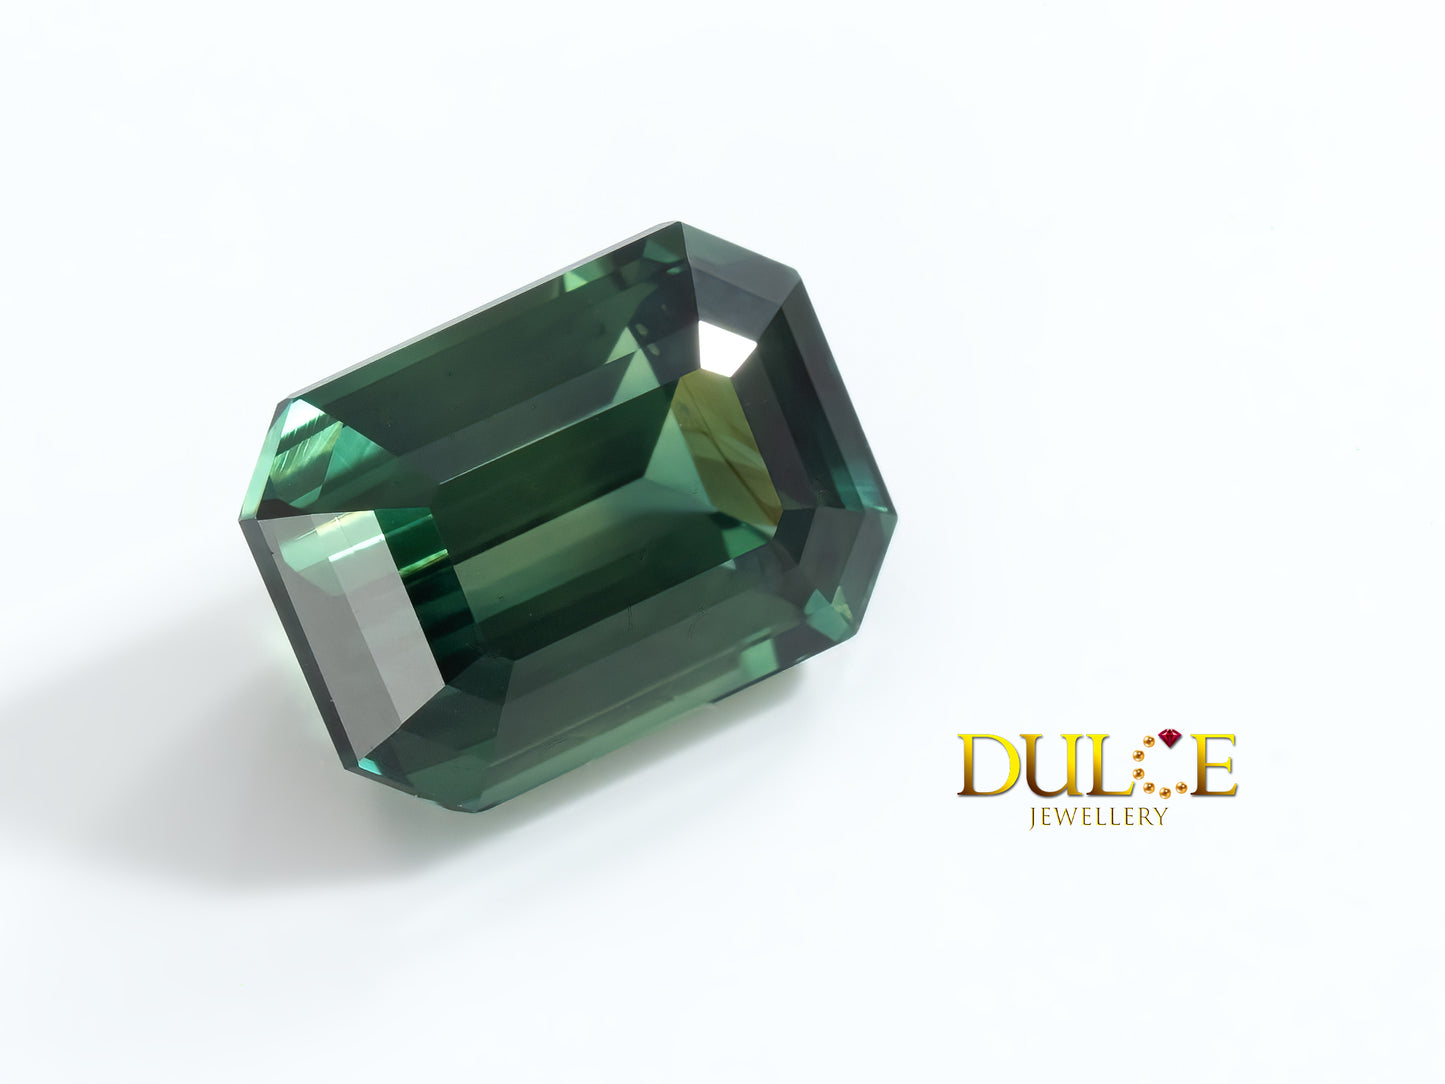 Green Sapphire (Price by request)